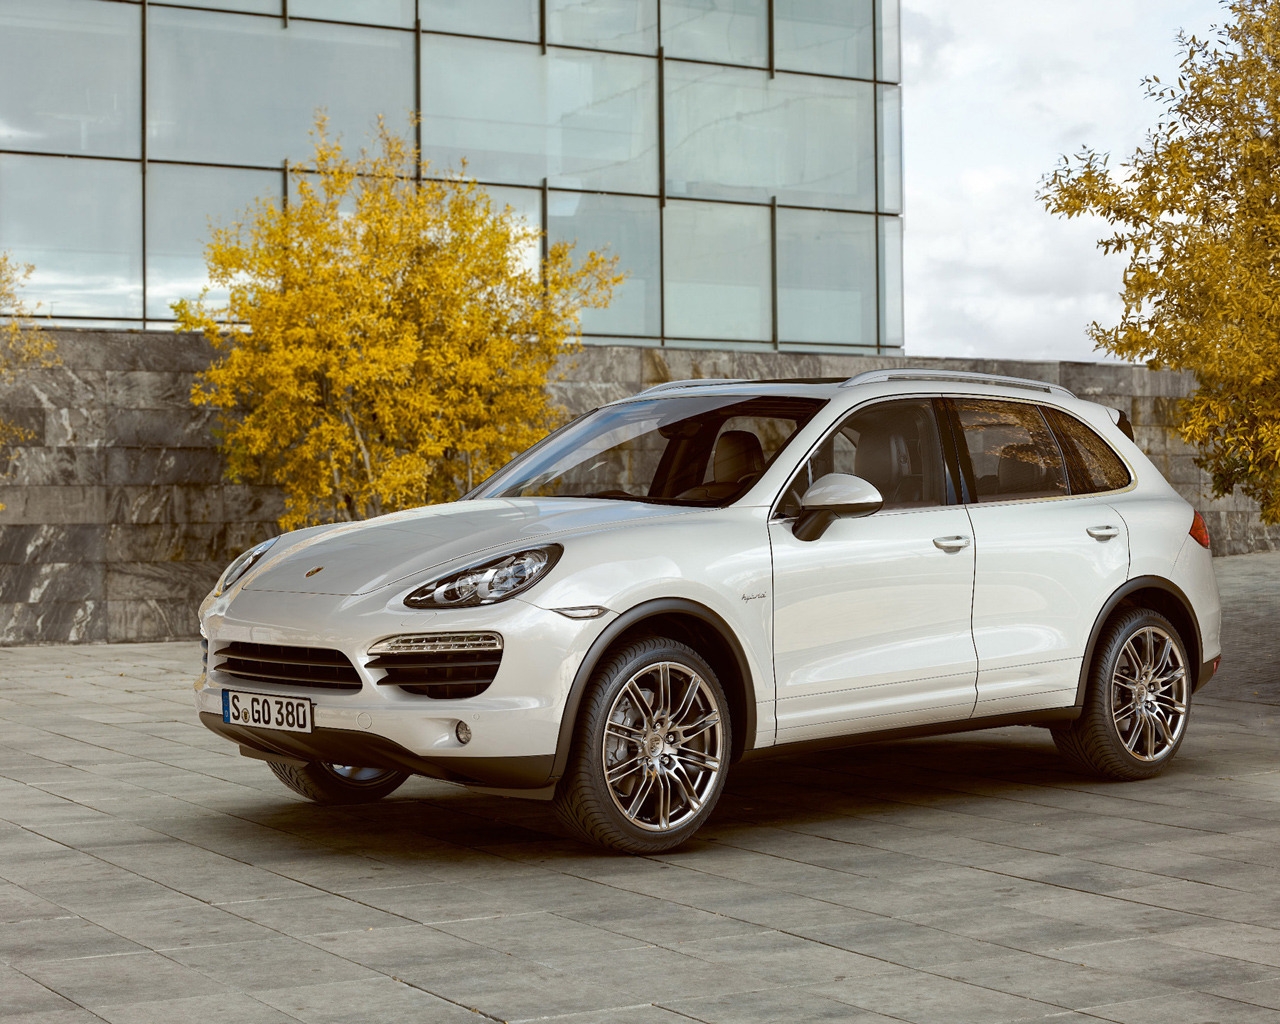 Porsche Cayenne S Hybrid 2011 Front And Side for 1280 x 1024 resolution